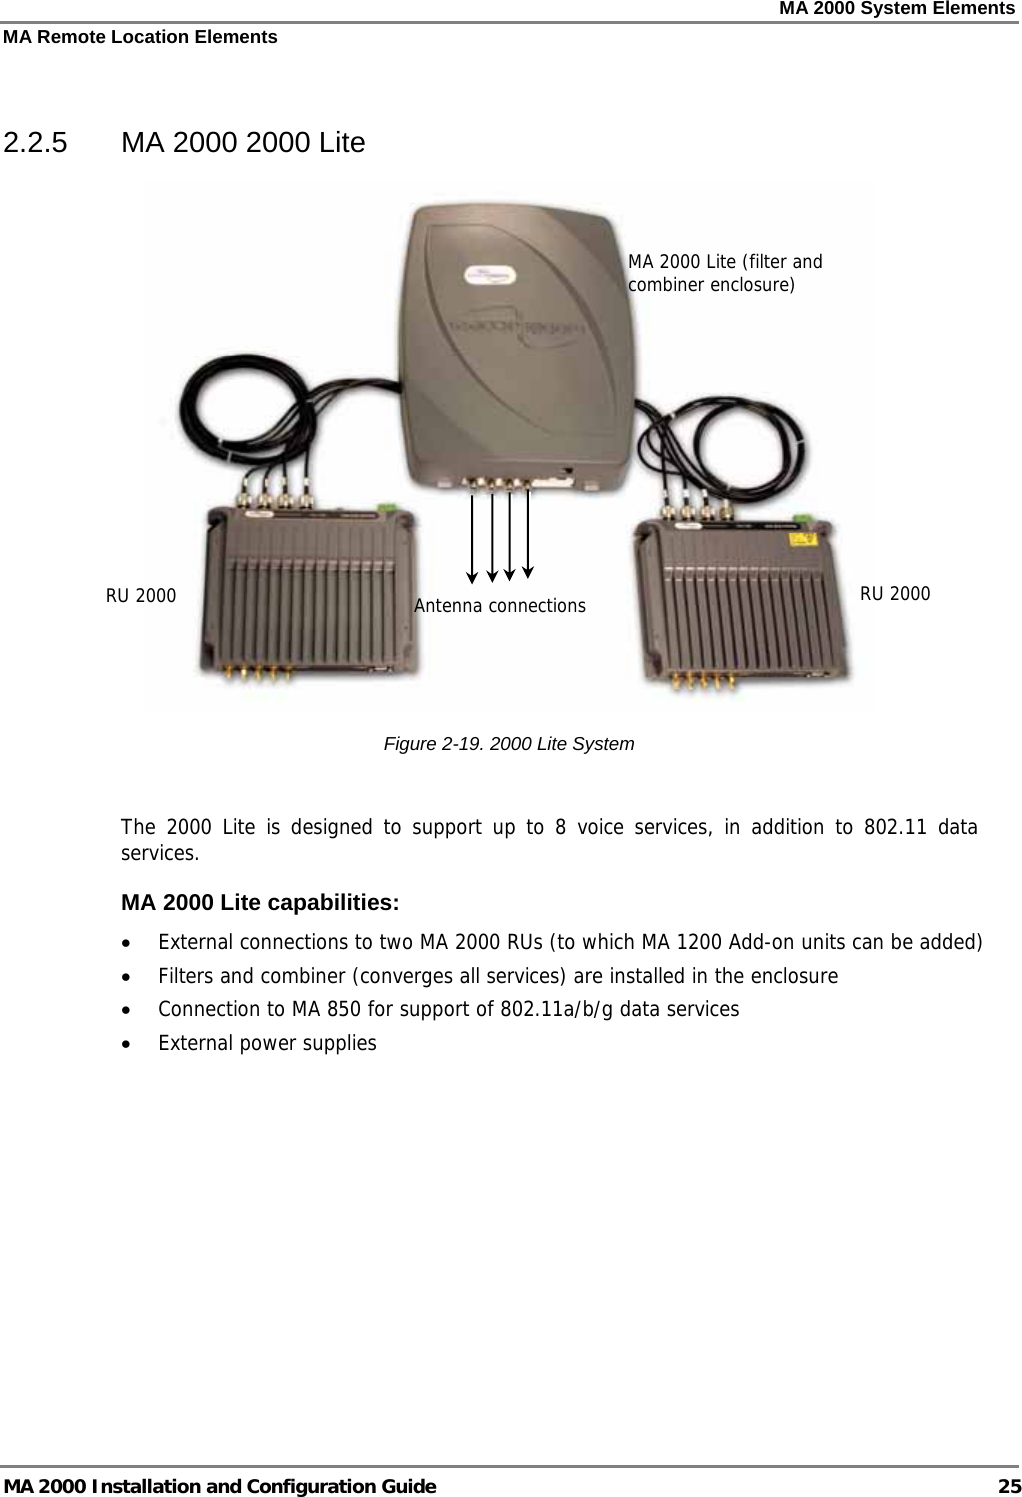 MA 2000 System Elements MA Remote Location Elements MA 2000 Installation and Configuration Guide  25  2.2.5  MA 2000 2000 Lite   Figure  2-19. 2000 Lite System   The 2000 Lite is designed to support up to 8 voice services, in addition to 802.11 data services.  MA 2000 Lite capabilities: • External connections to two MA 2000 RUs (to which MA 1200 Add-on units can be added) • Filters and combiner (converges all services) are installed in the enclosure • Connection to MA 850 for support of 802.11a/b/g data services  • External power supplies   MA 2000 Lite (filter and combiner enclosure) RU 2000Antenna connectionsRU 2000 